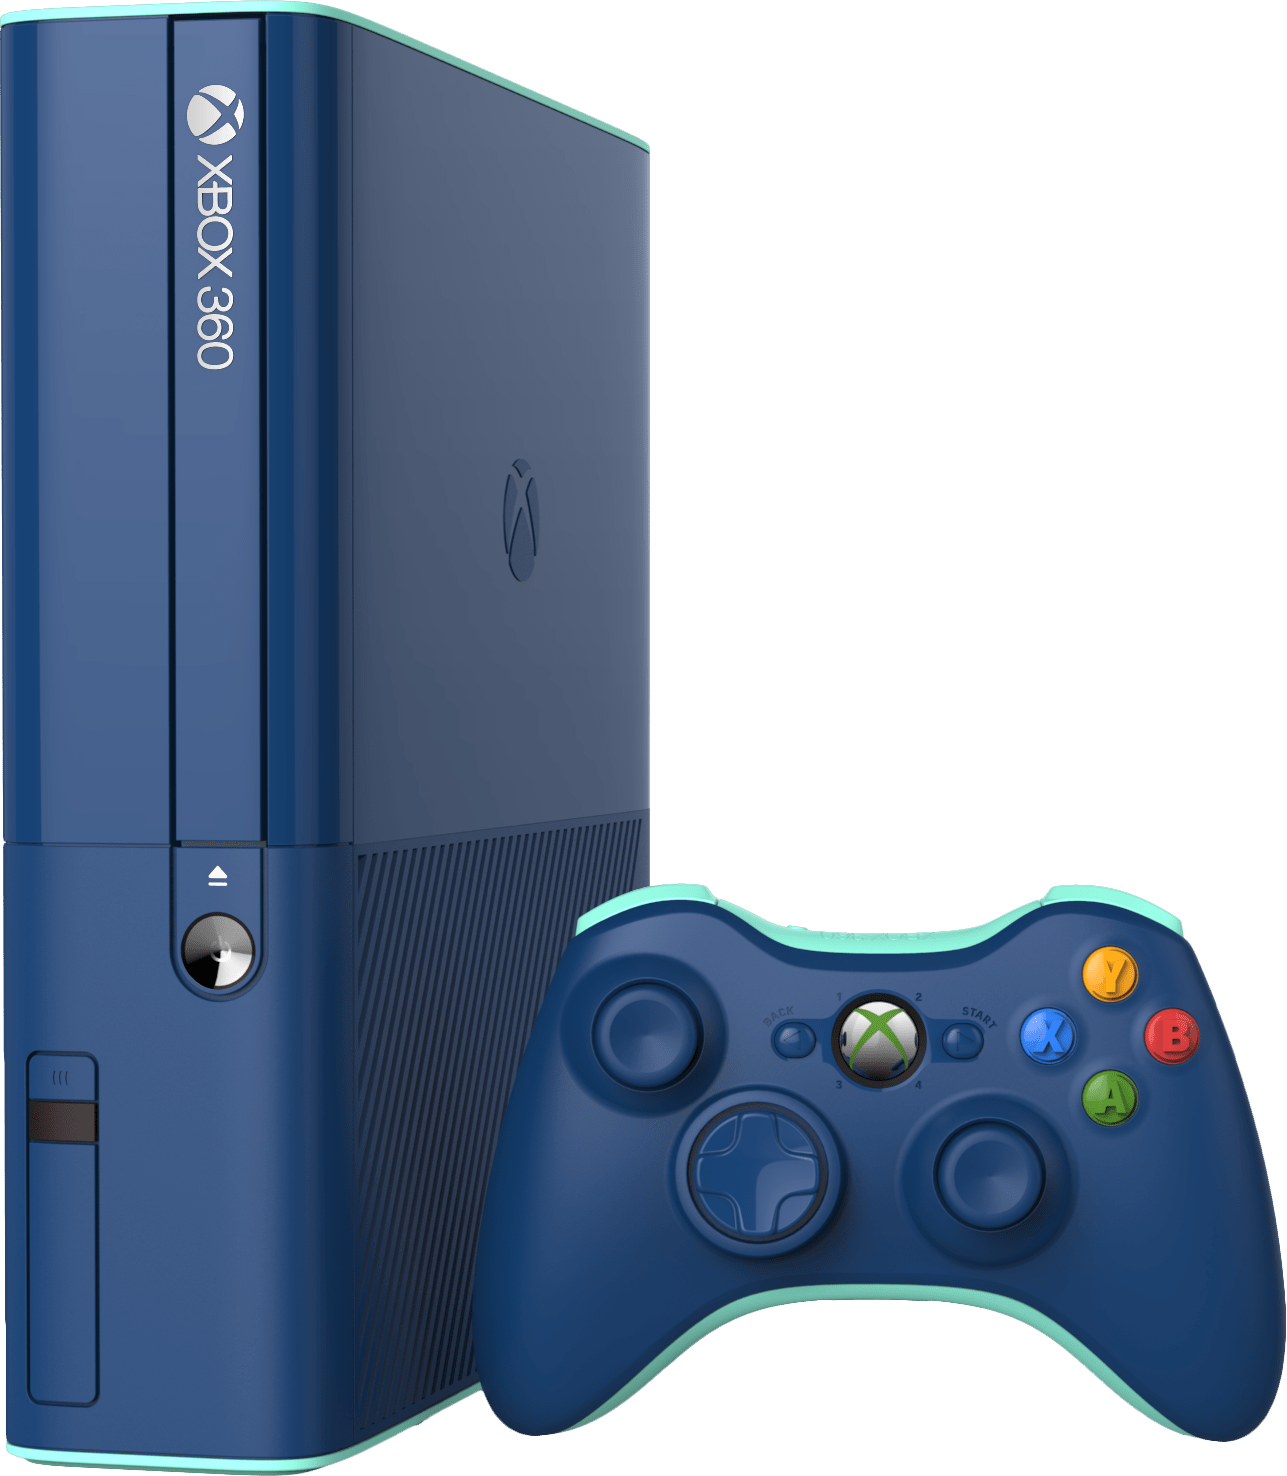 xbox 360 blue special edition